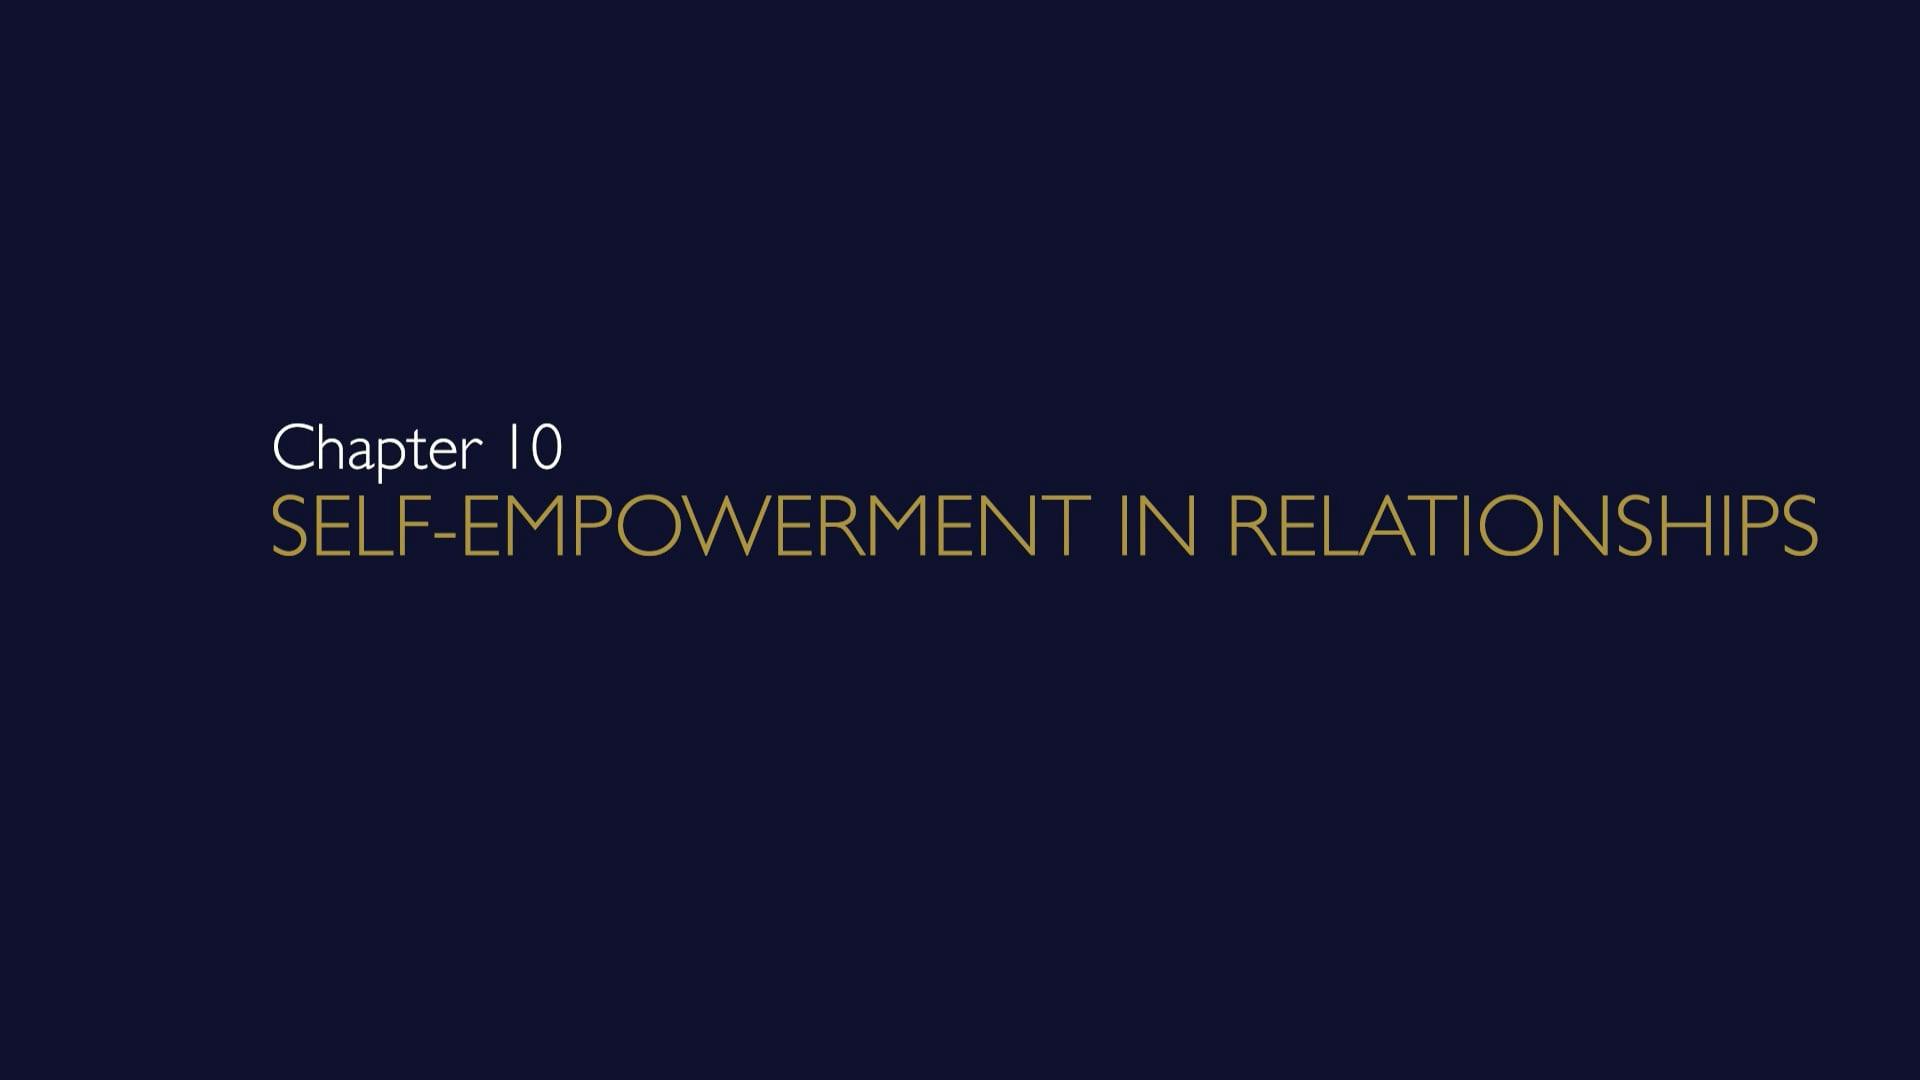 Self-Empowerment in Relationships